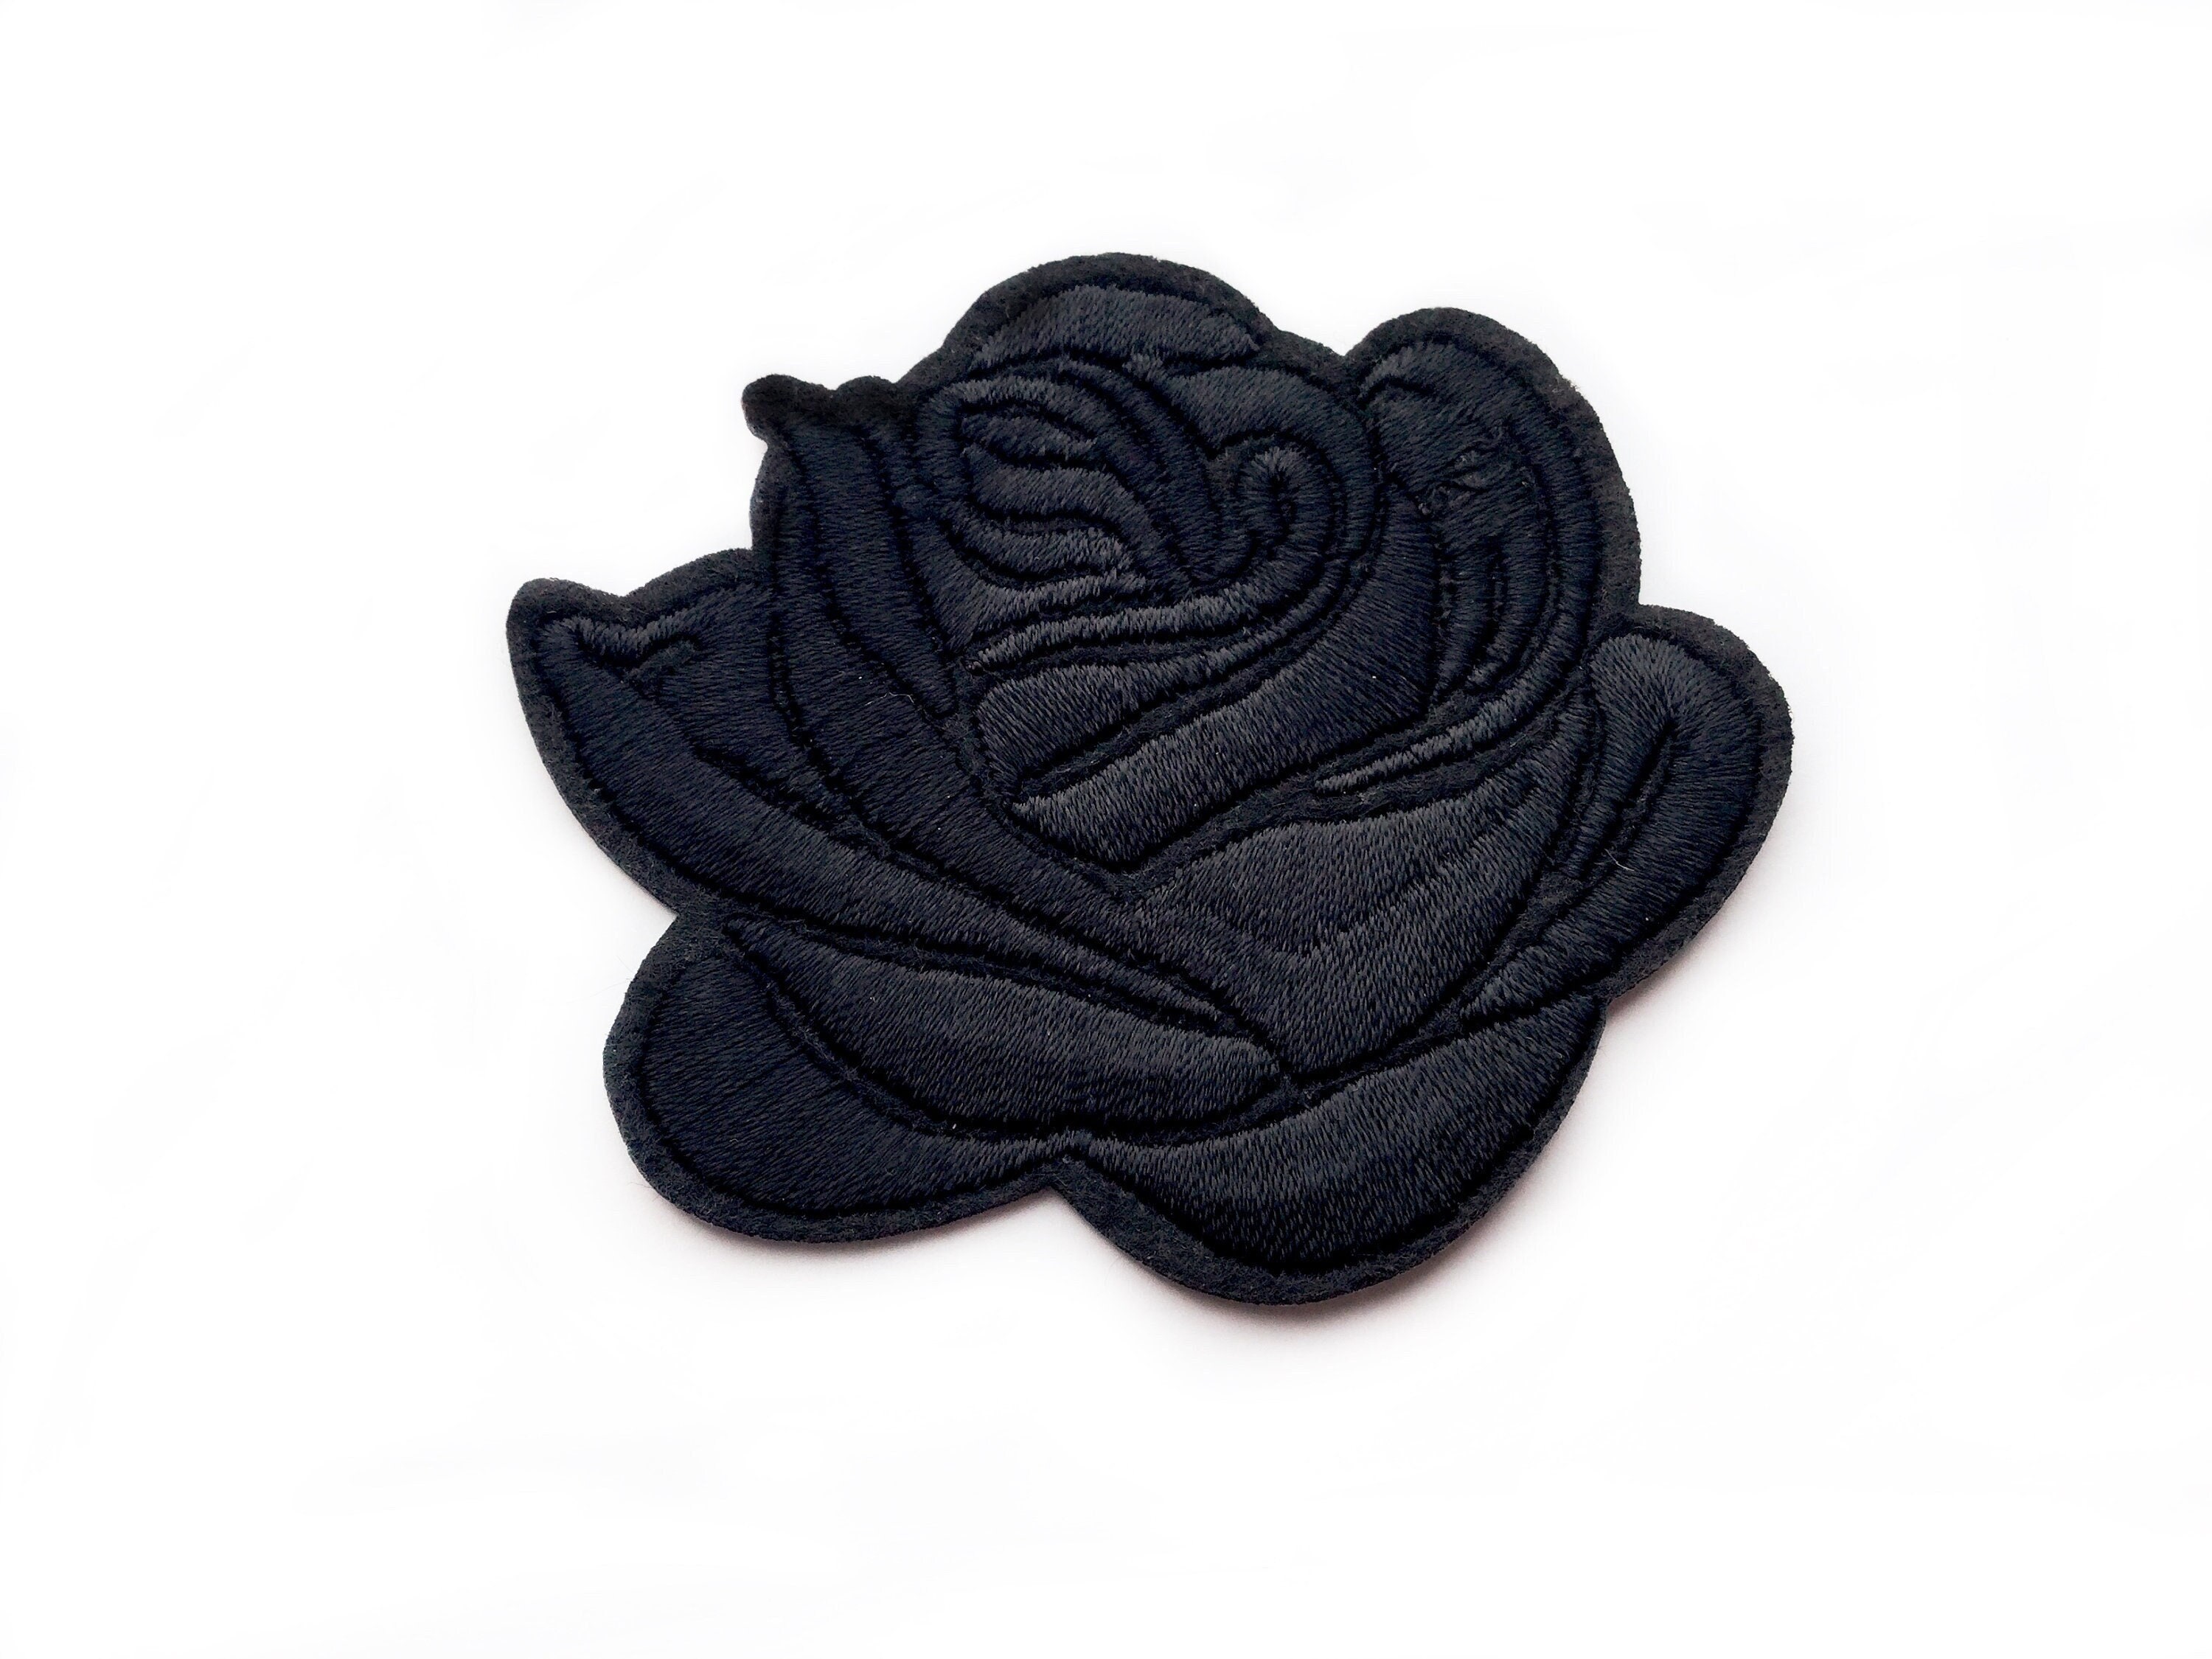 Melting Eye ball Rose with Spider Webs & Crosses Goth Punk Patch - White,  Black